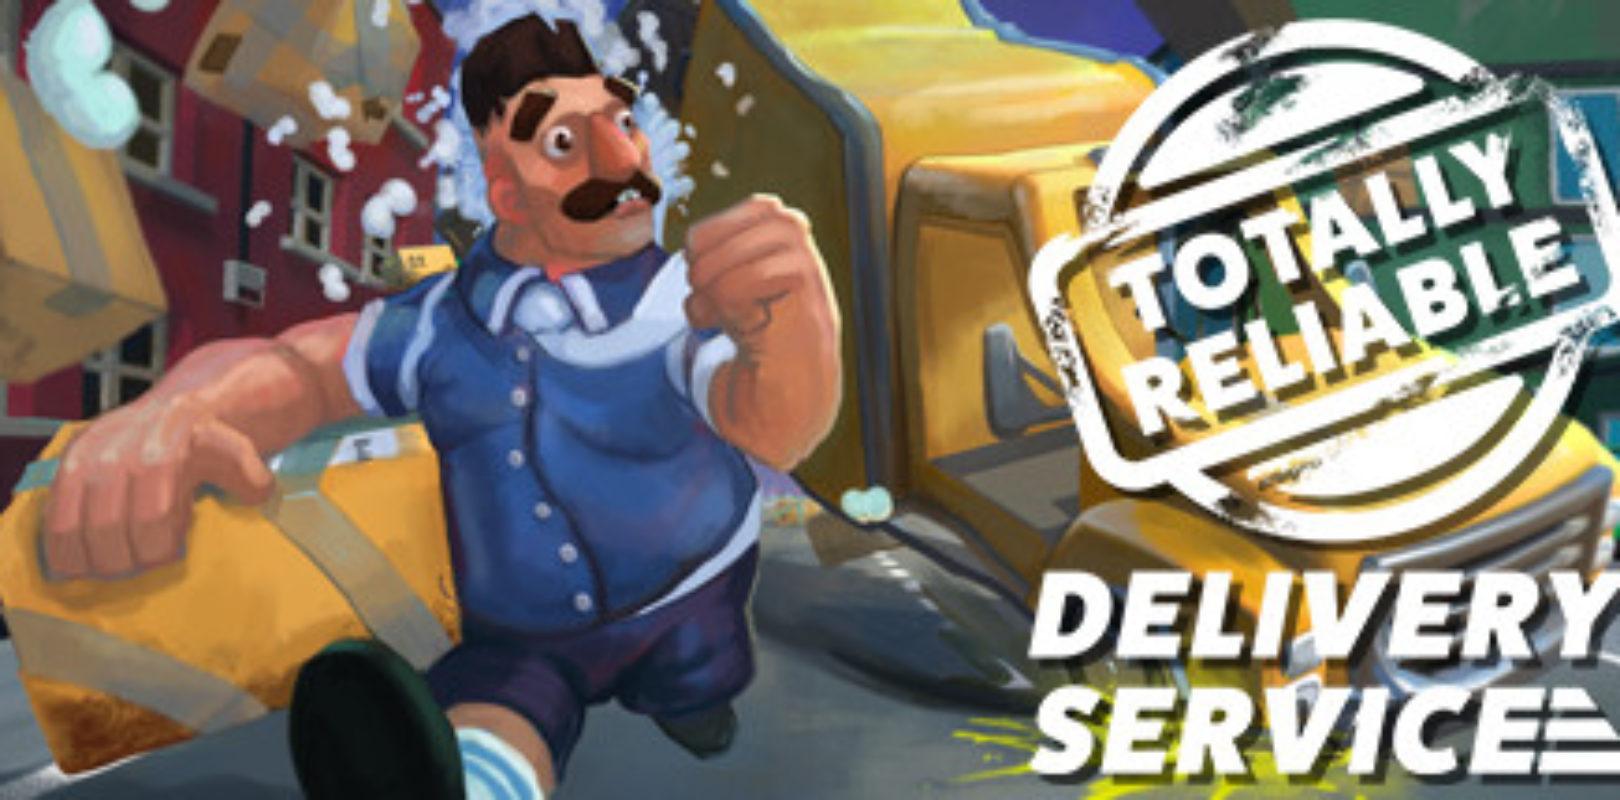 Totally reliable delivery service steam фото 93